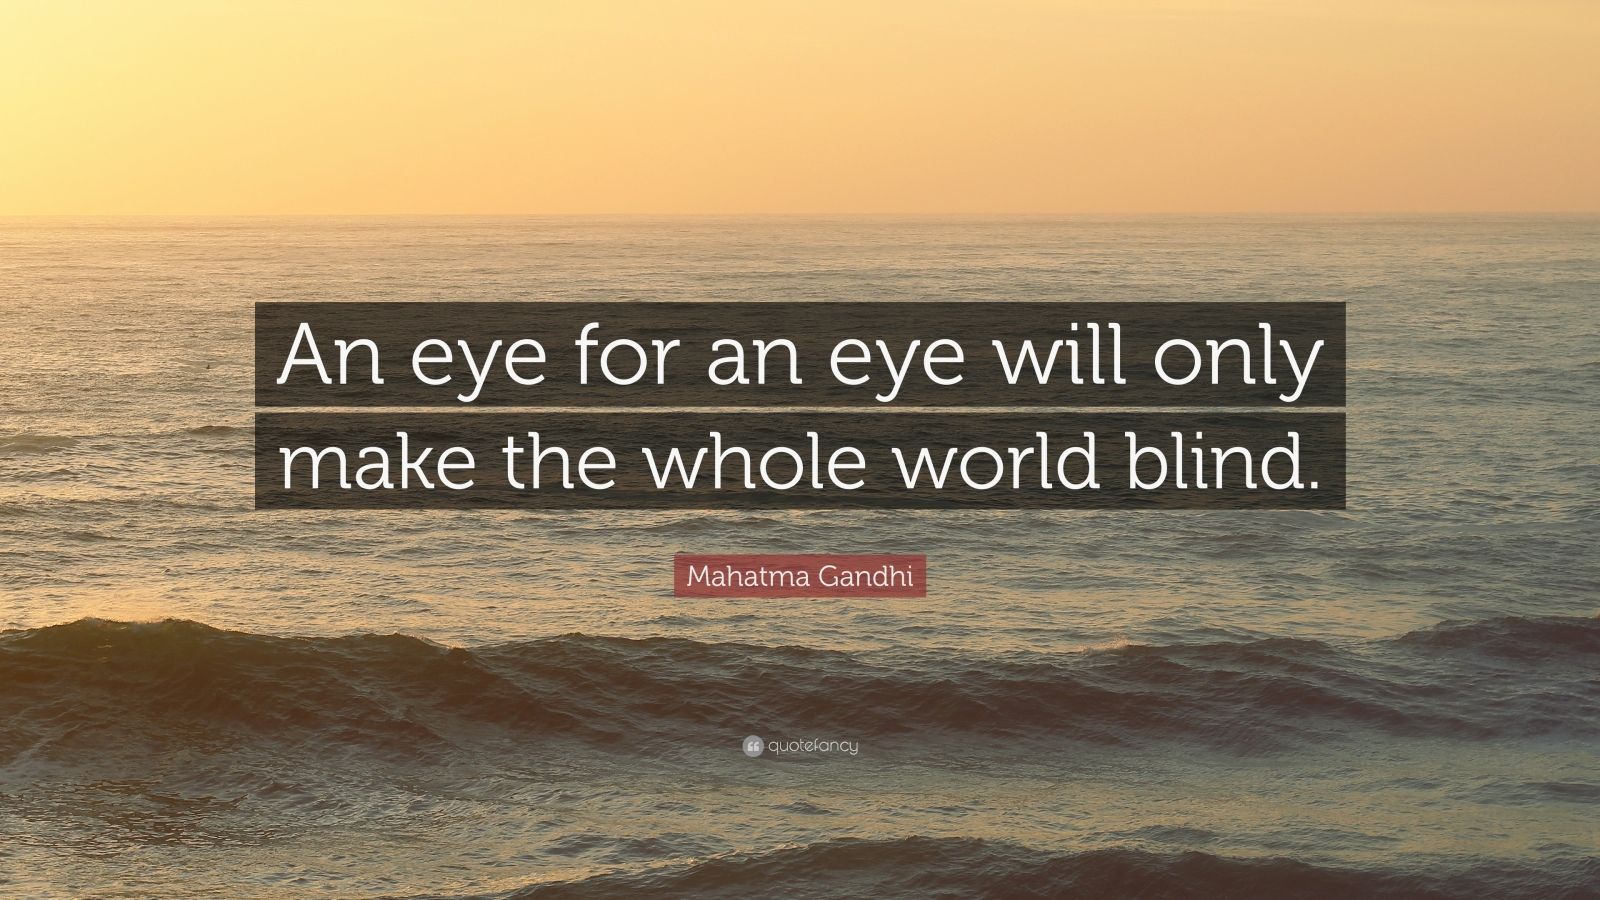 an eye for an eye makes the whole world blind but